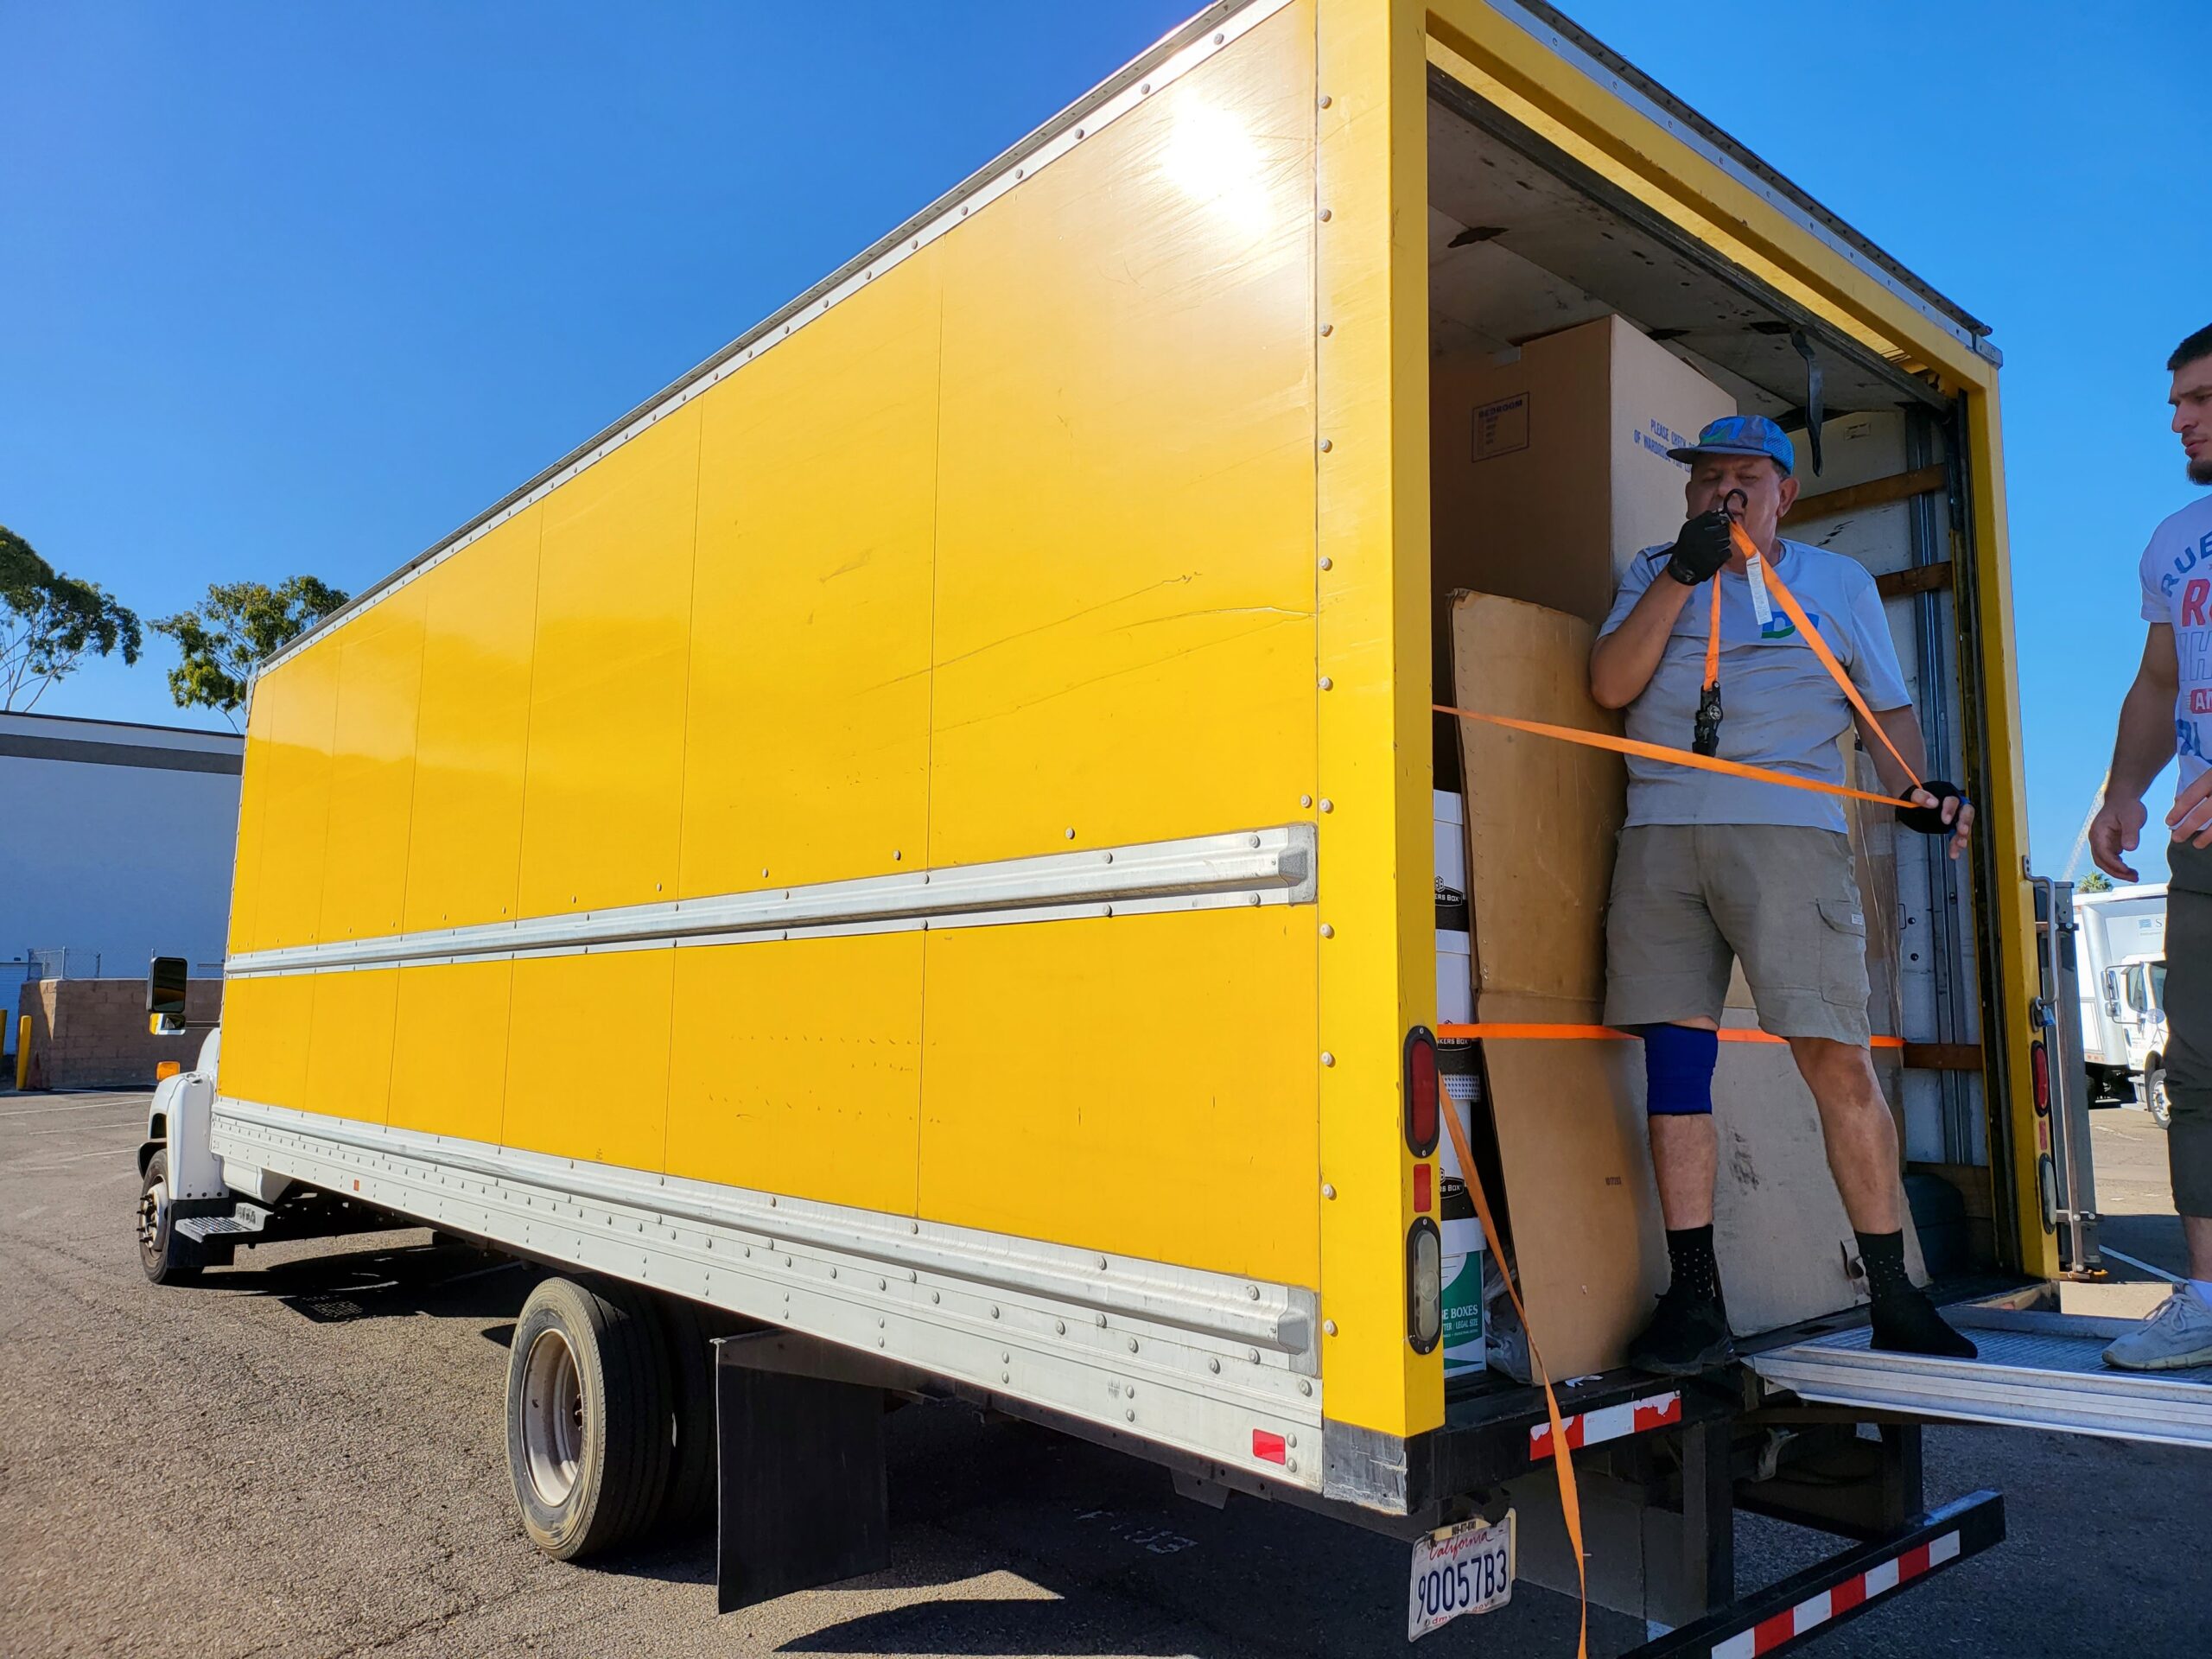 7 Secrets to Find the Best Movers in San Diego